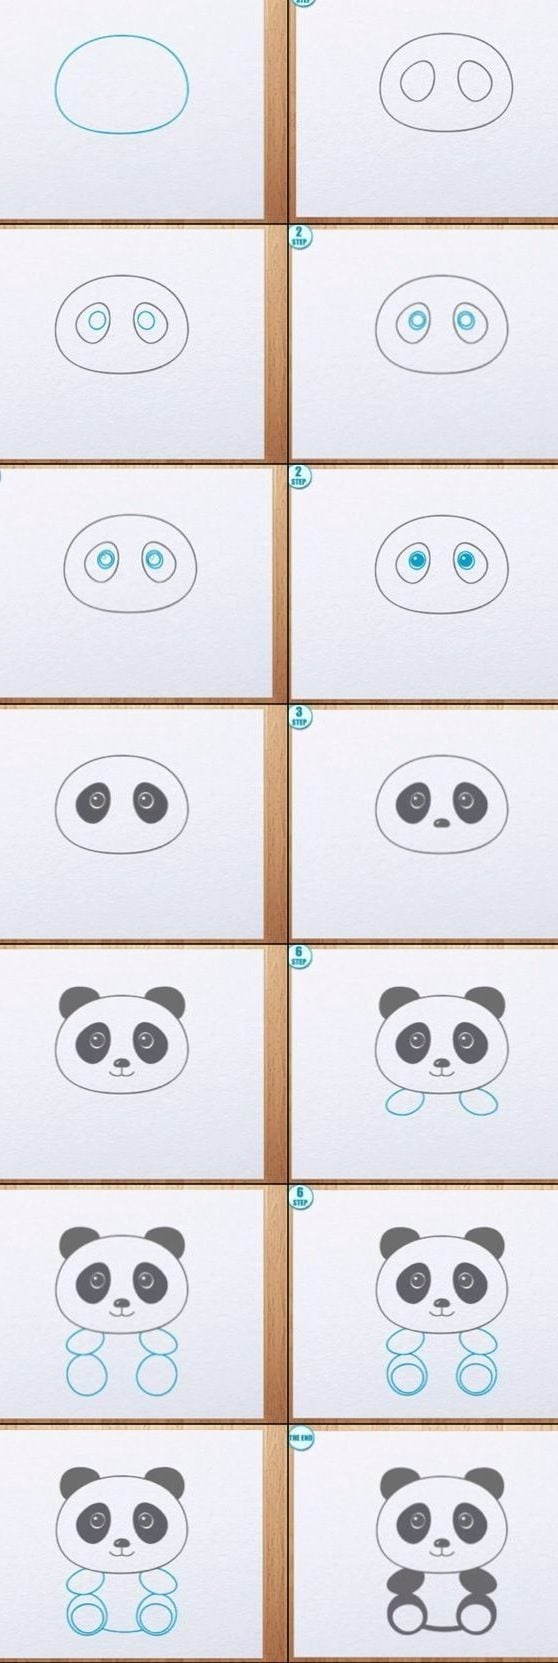 20 Easy Drawing Tutorials For Beginners Cool Things To Draw Step By